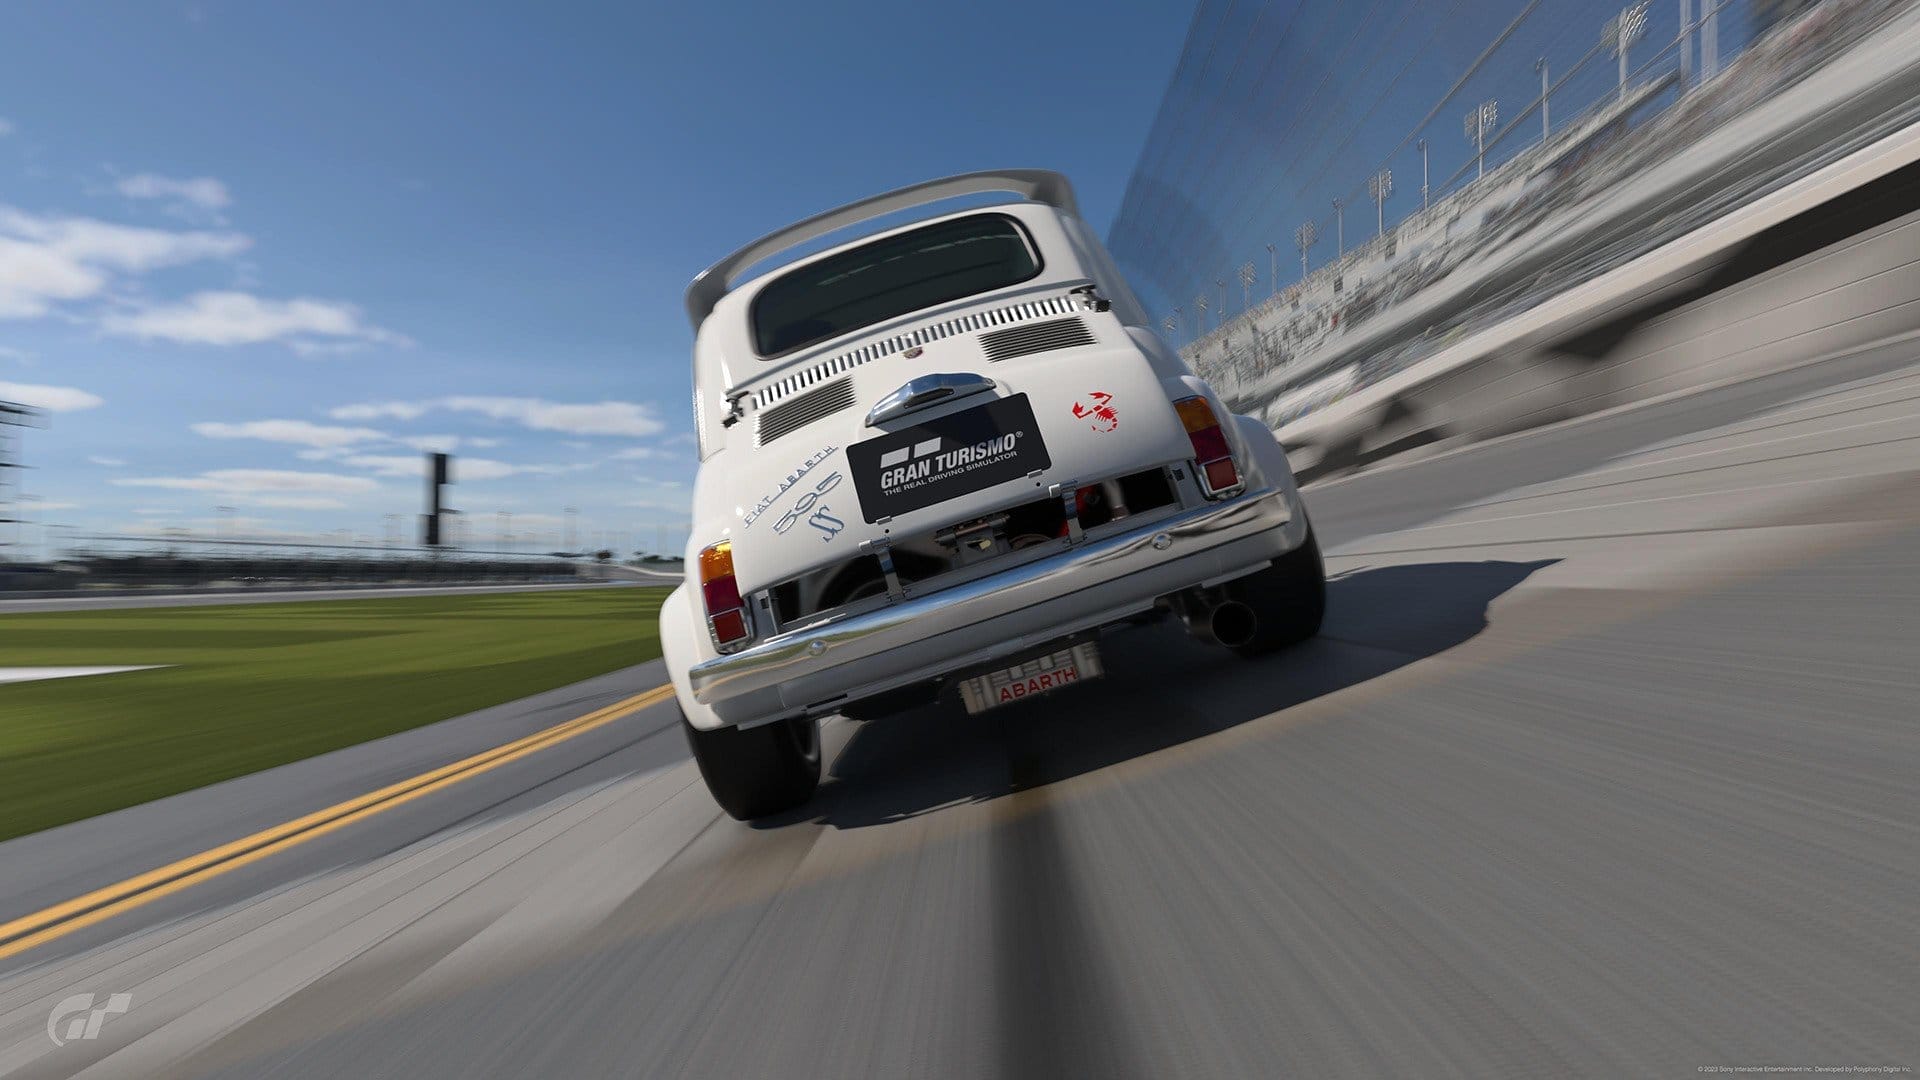 Gran Turismo 7 Update 1.41 Now Available: Fixes Custom Race